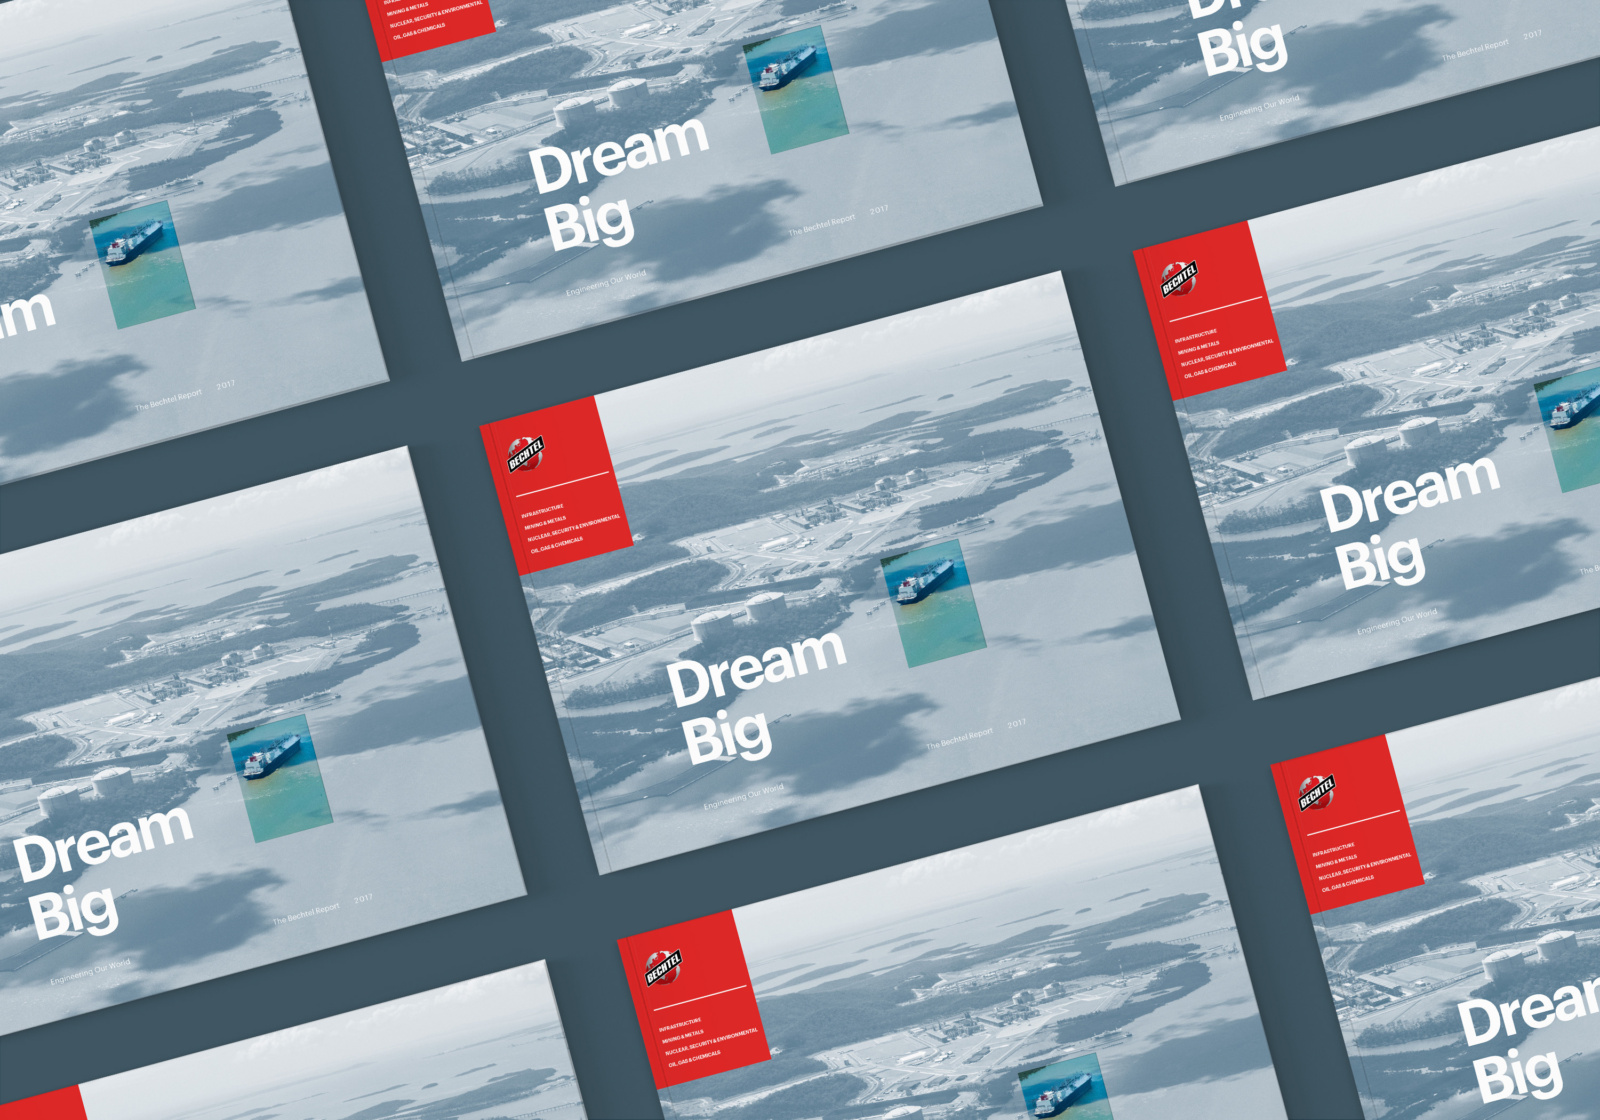 An array of covers of the 2017 Bechtel annual report design, “Dream Big”